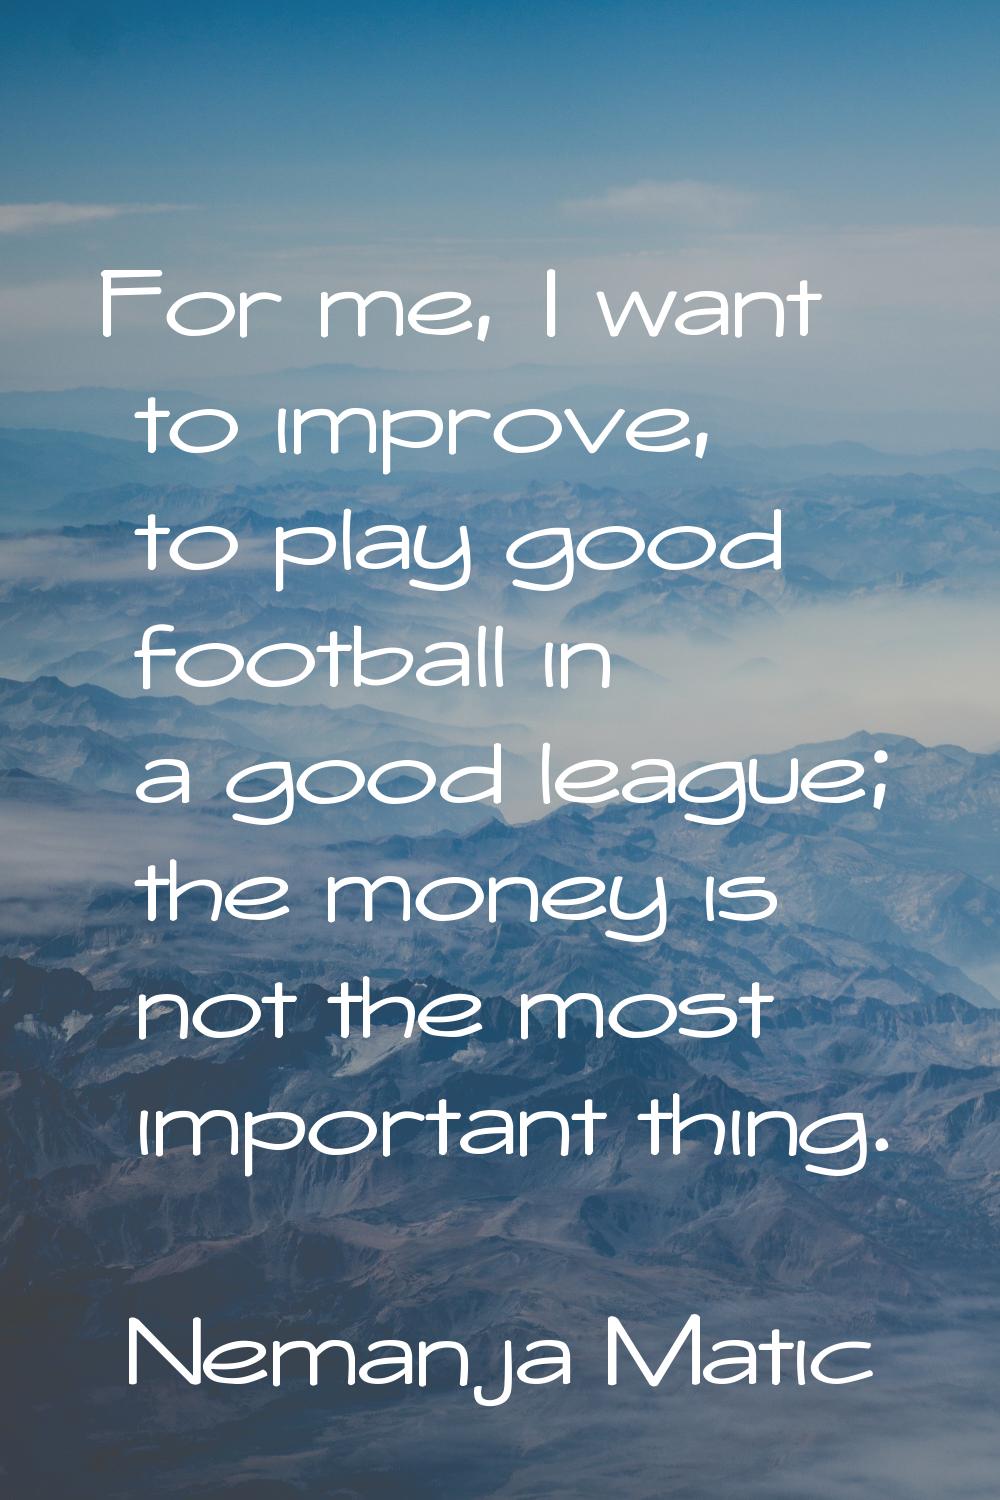 For me, I want to improve, to play good football in a good league; the money is not the most import